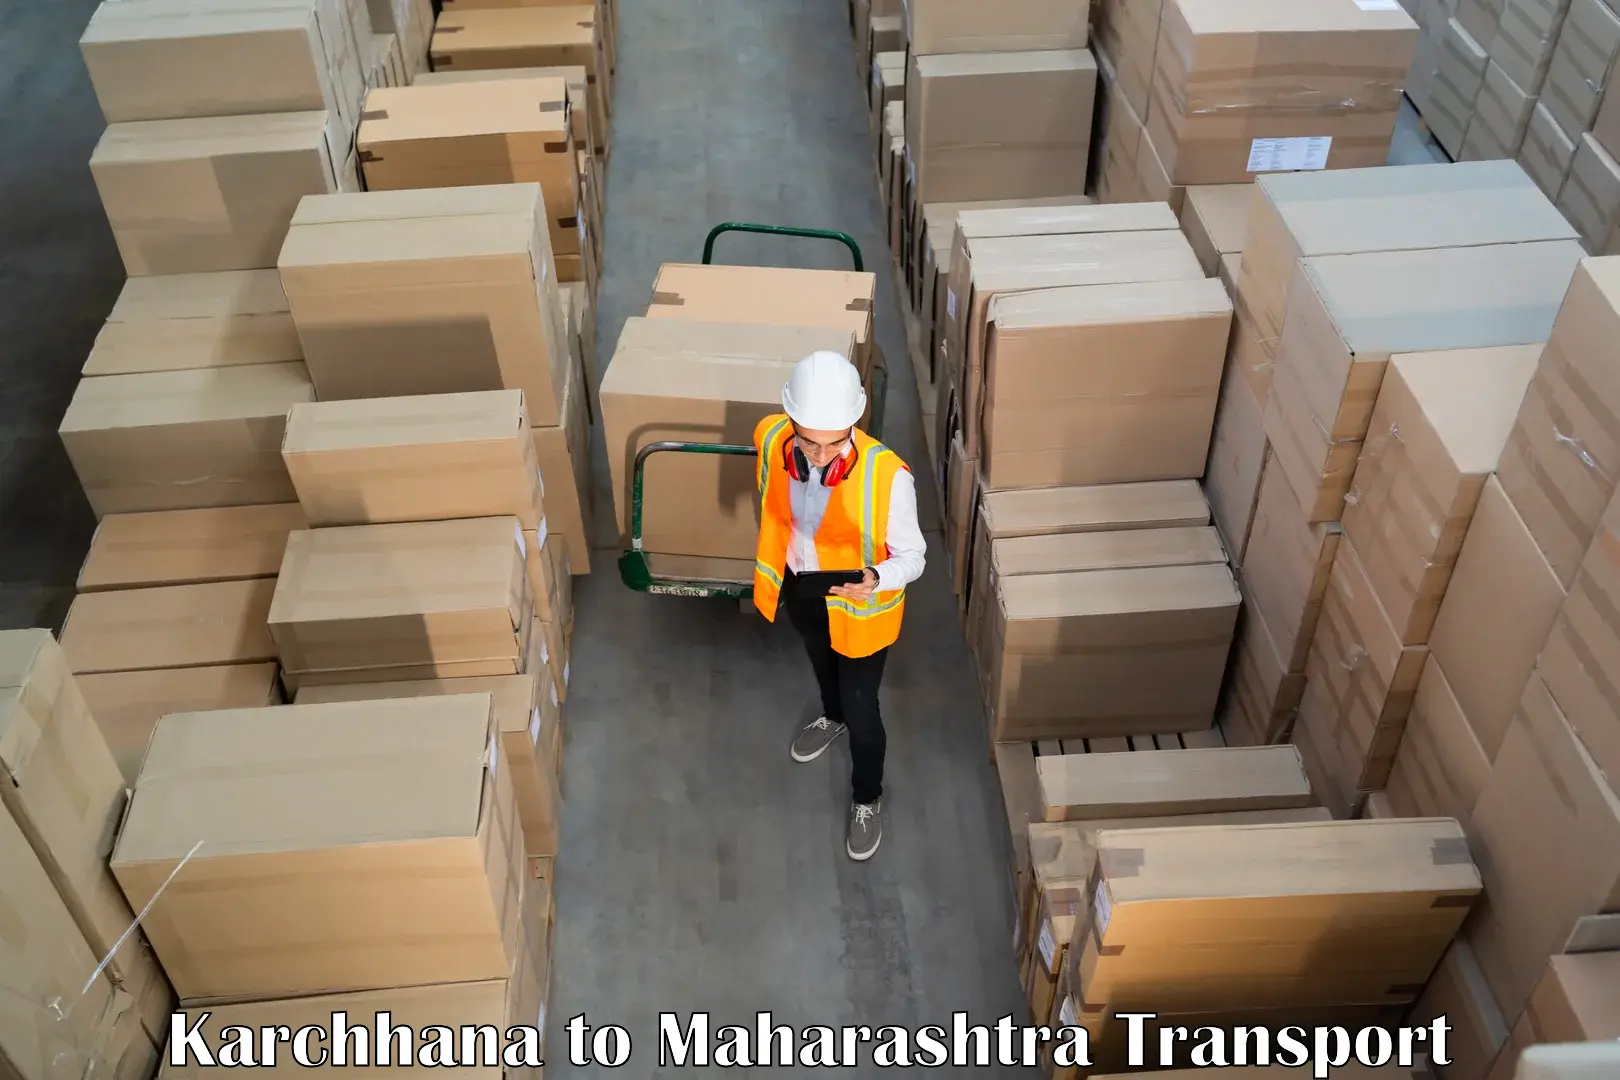 Container transport service Karchhana to Chembur